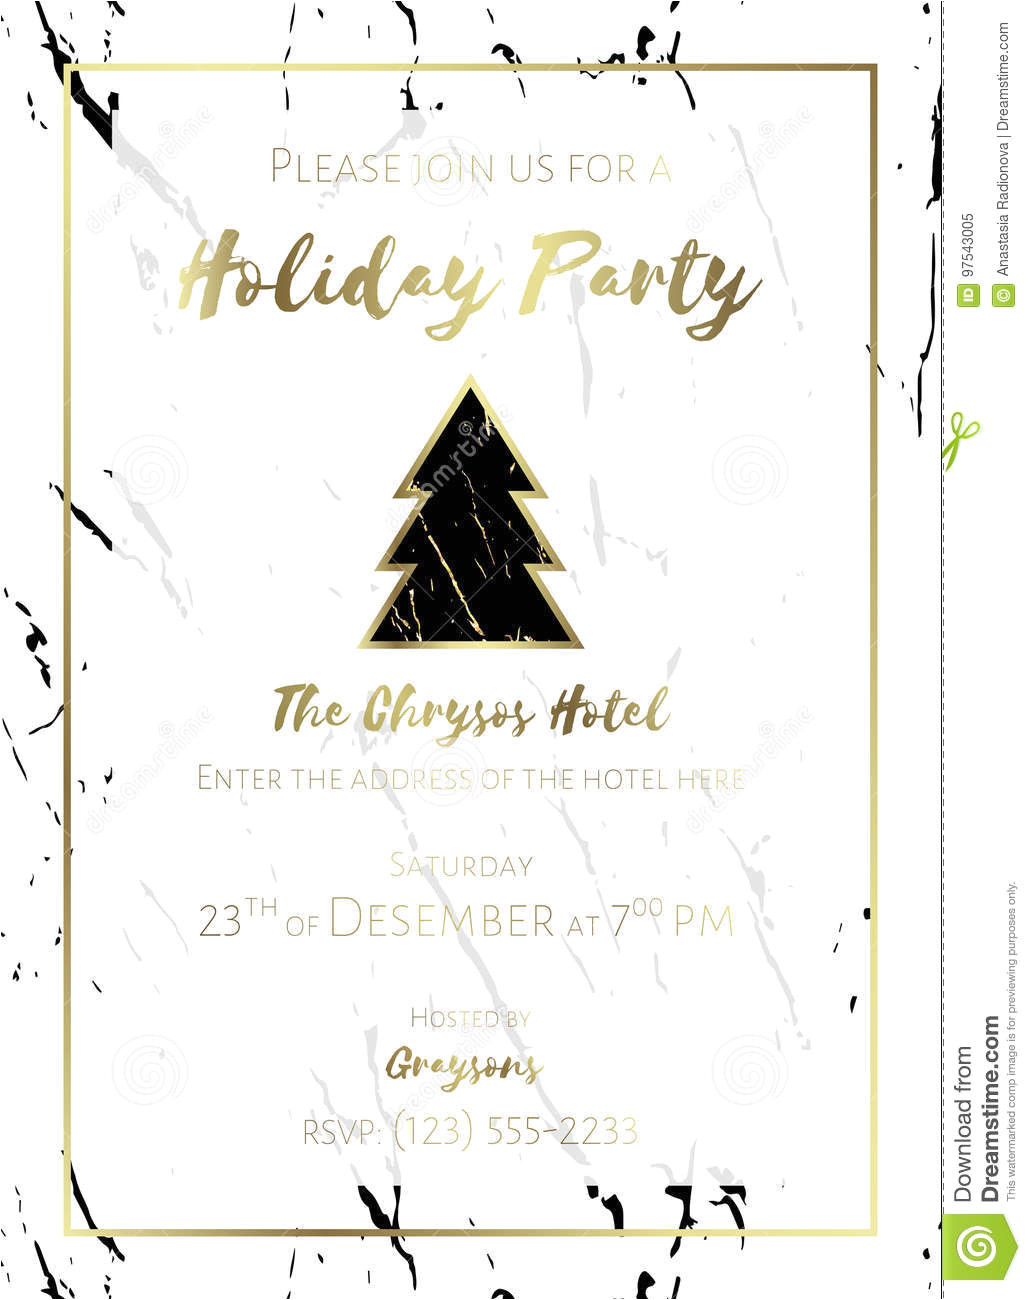 Christmas Party Invitation Template Black and White Christmas Party Invitation Black Gold and White Stock